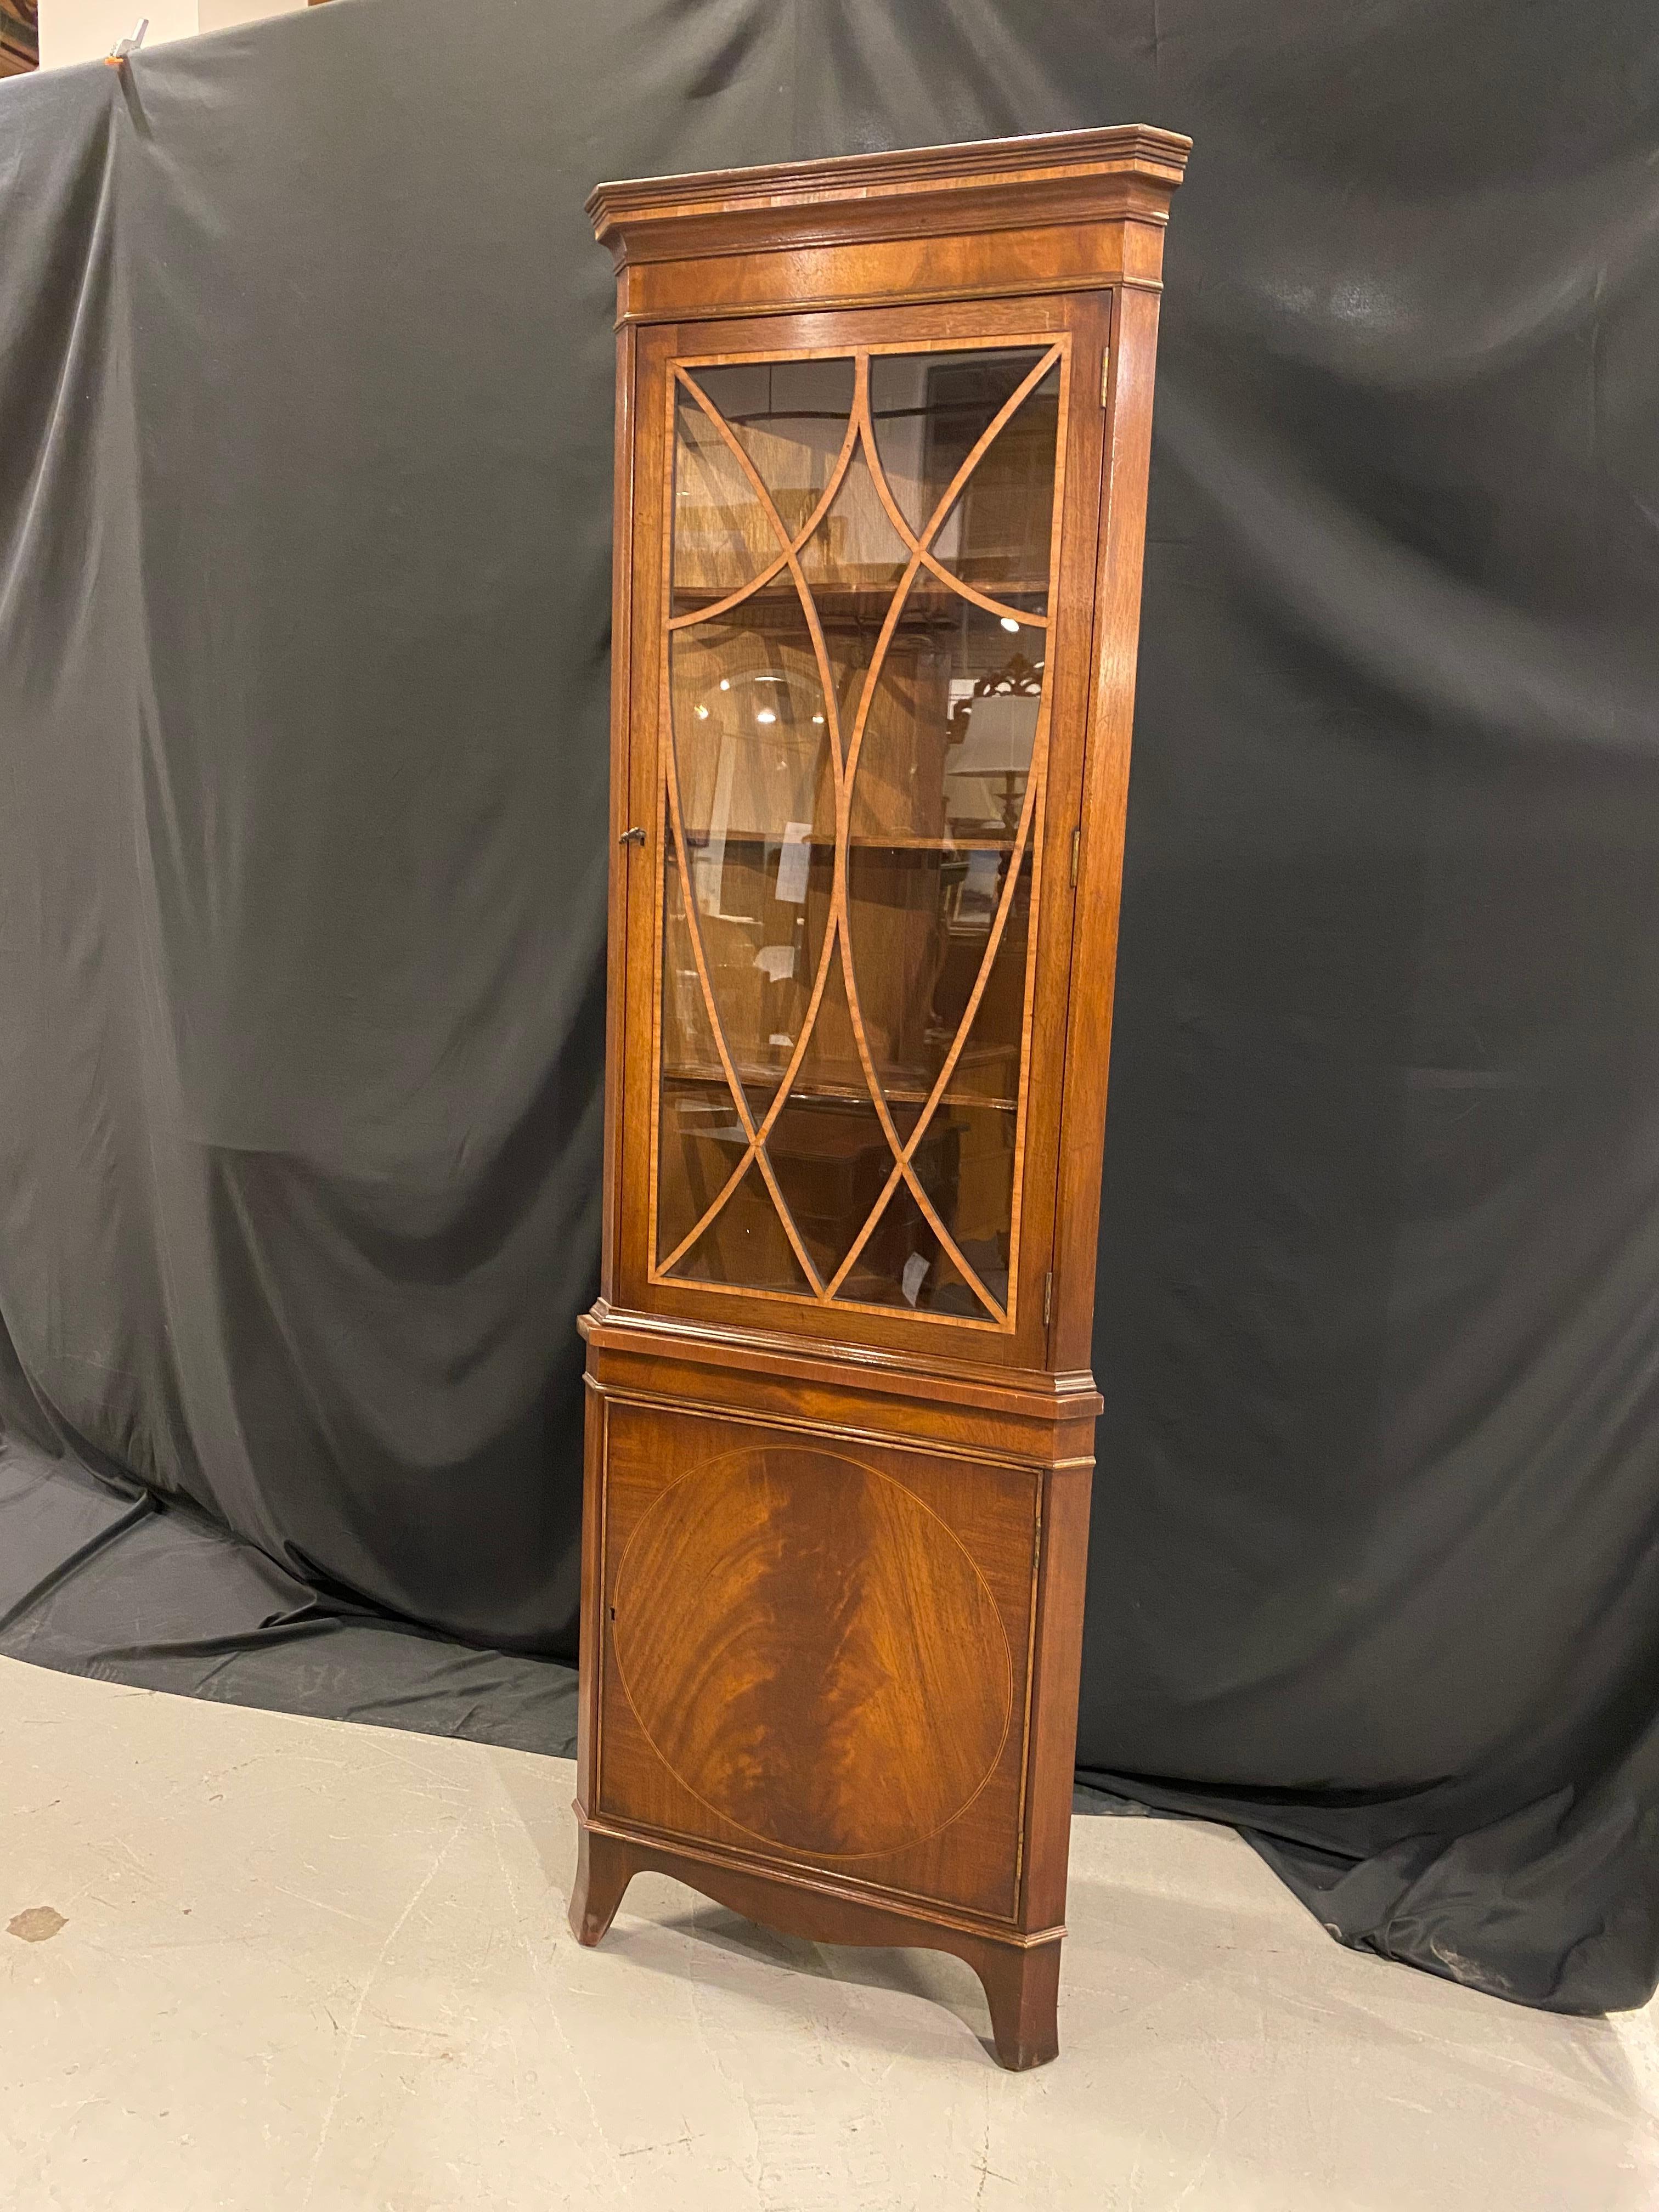 This is a beautifully balanced 18th century style corner cabinet crafted in mahogany with a lovely satin wood banded fret work detail, in the Sheraton style, on the upper door which hold individually hand glazed glass panels. The lower door is a